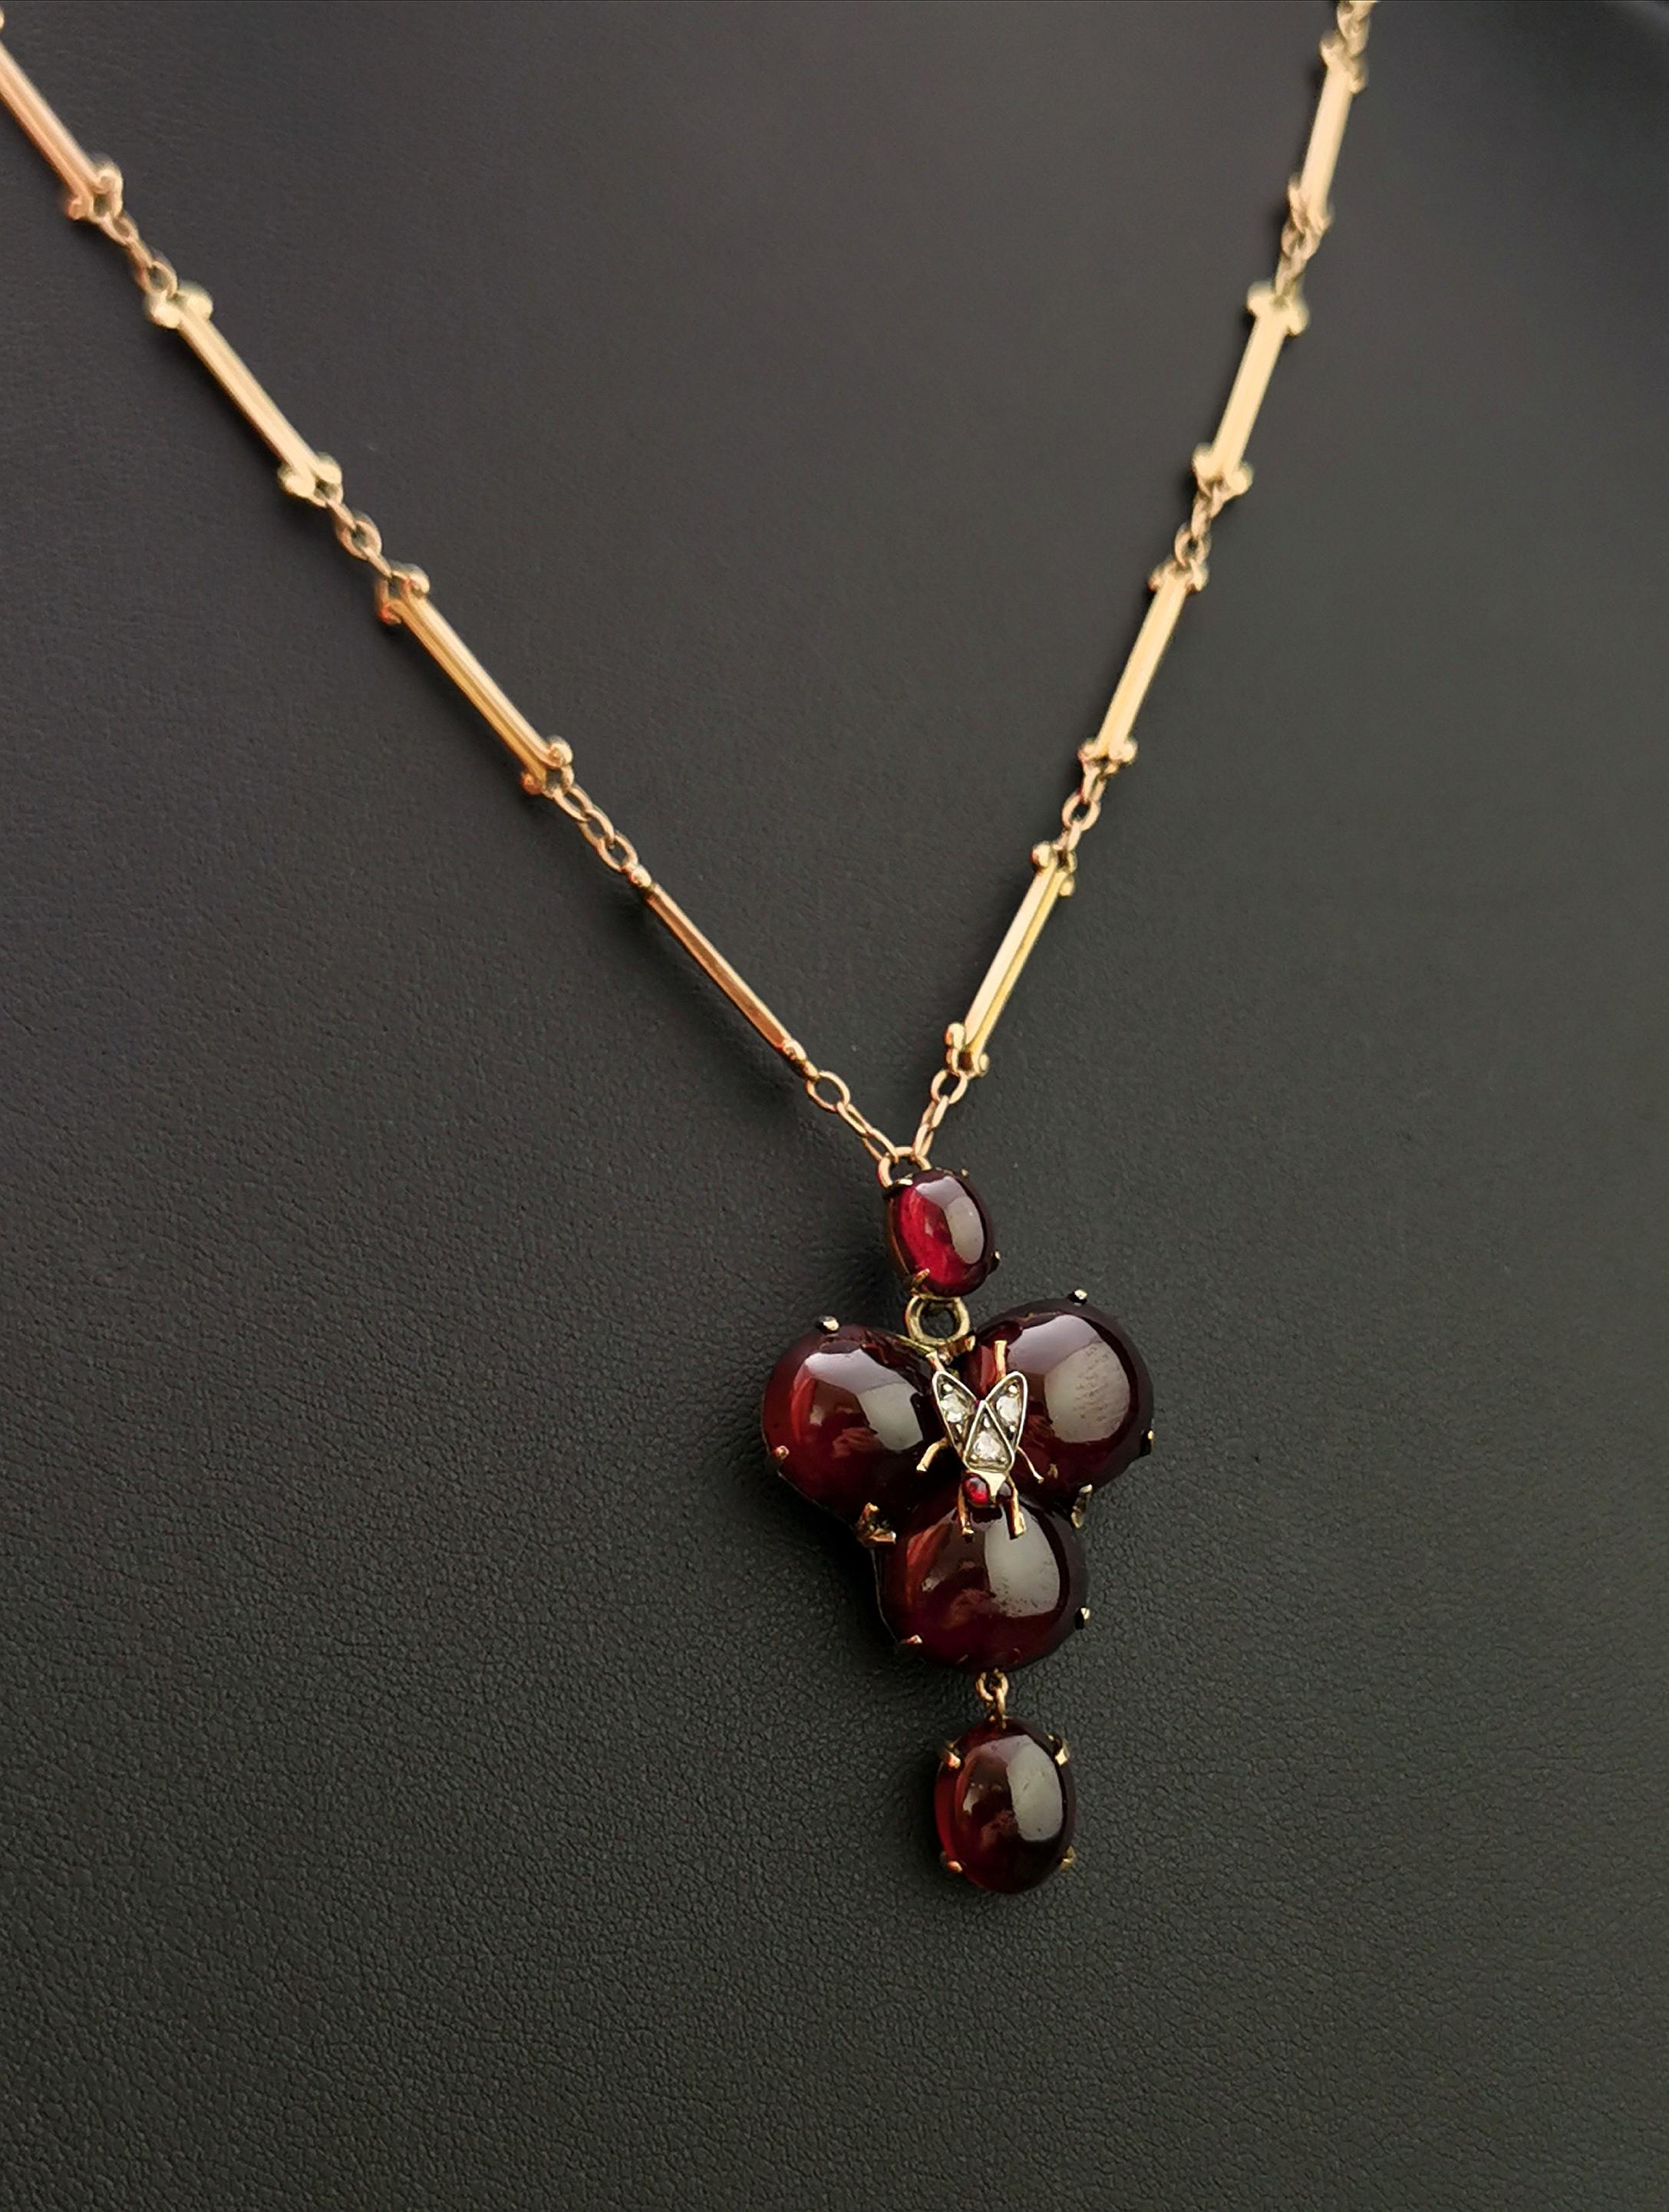 Victorian Mourning Pendant Necklace, Garnet, Diamond Fly, 18 Karat Yellow Gold For Sale 3